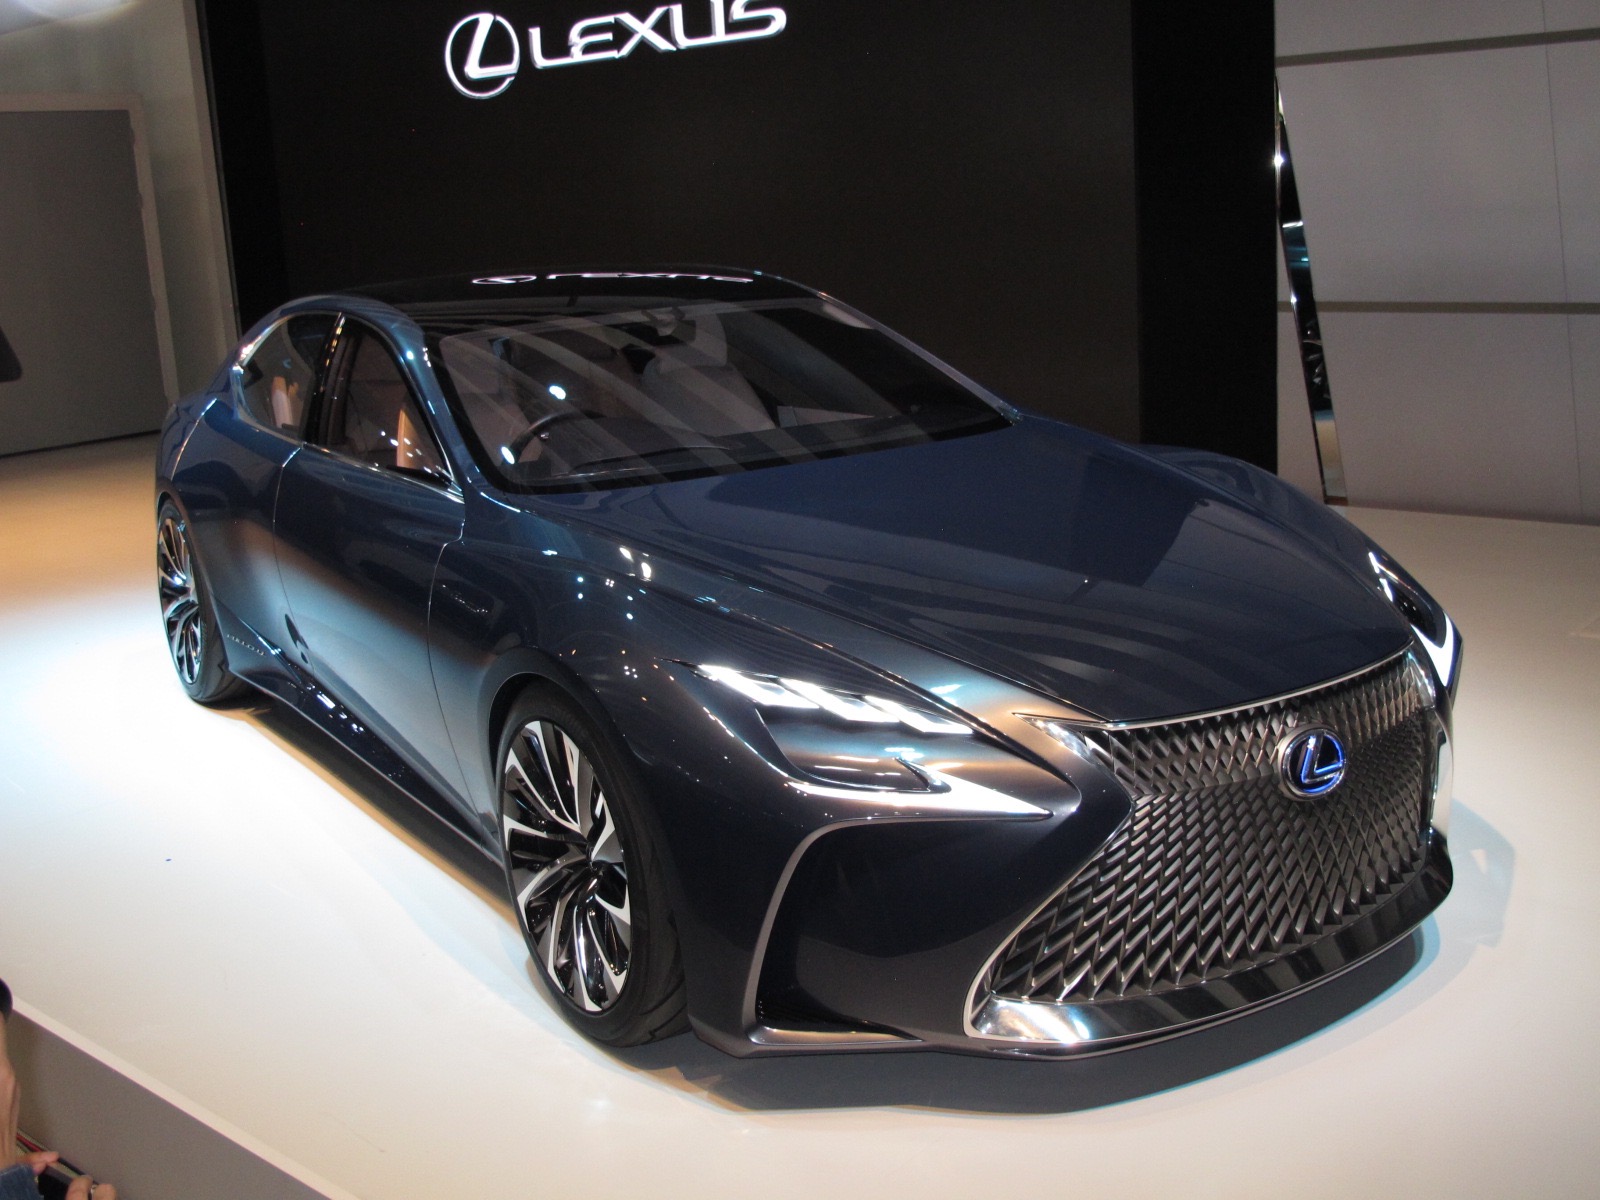 Lexus Fuel Cell Car Likely To Be Based On New Ls Luxury Sedan